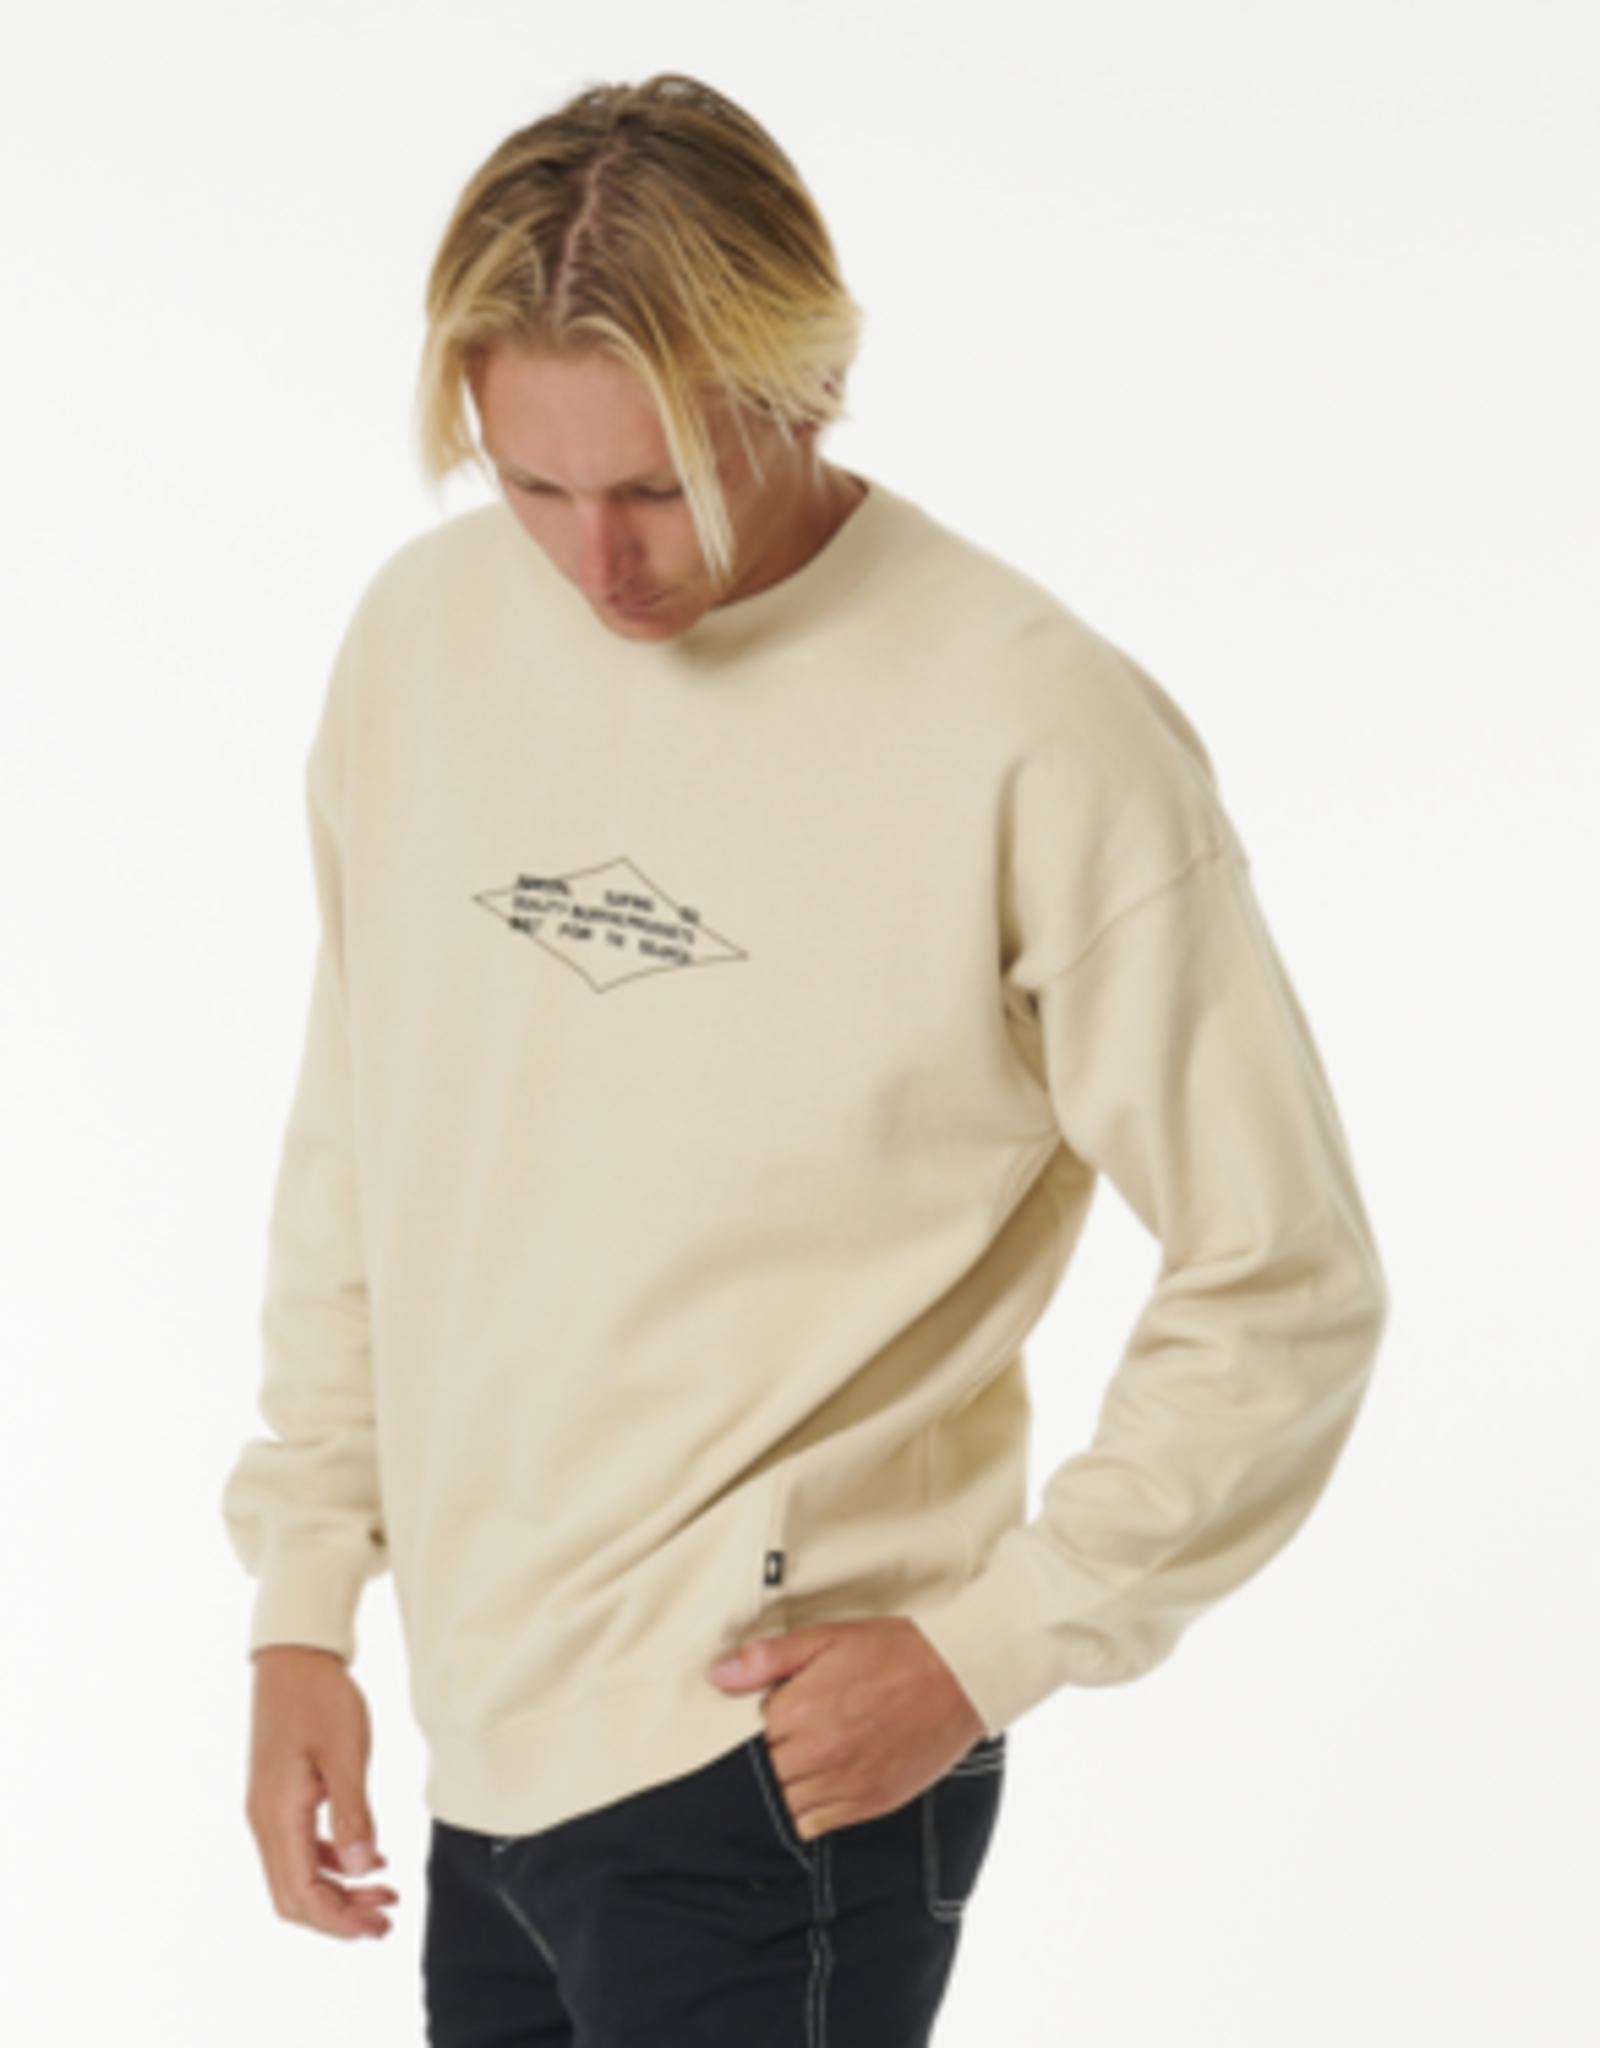 RIPCURL QUALITY SURF PRODUCTS CREW